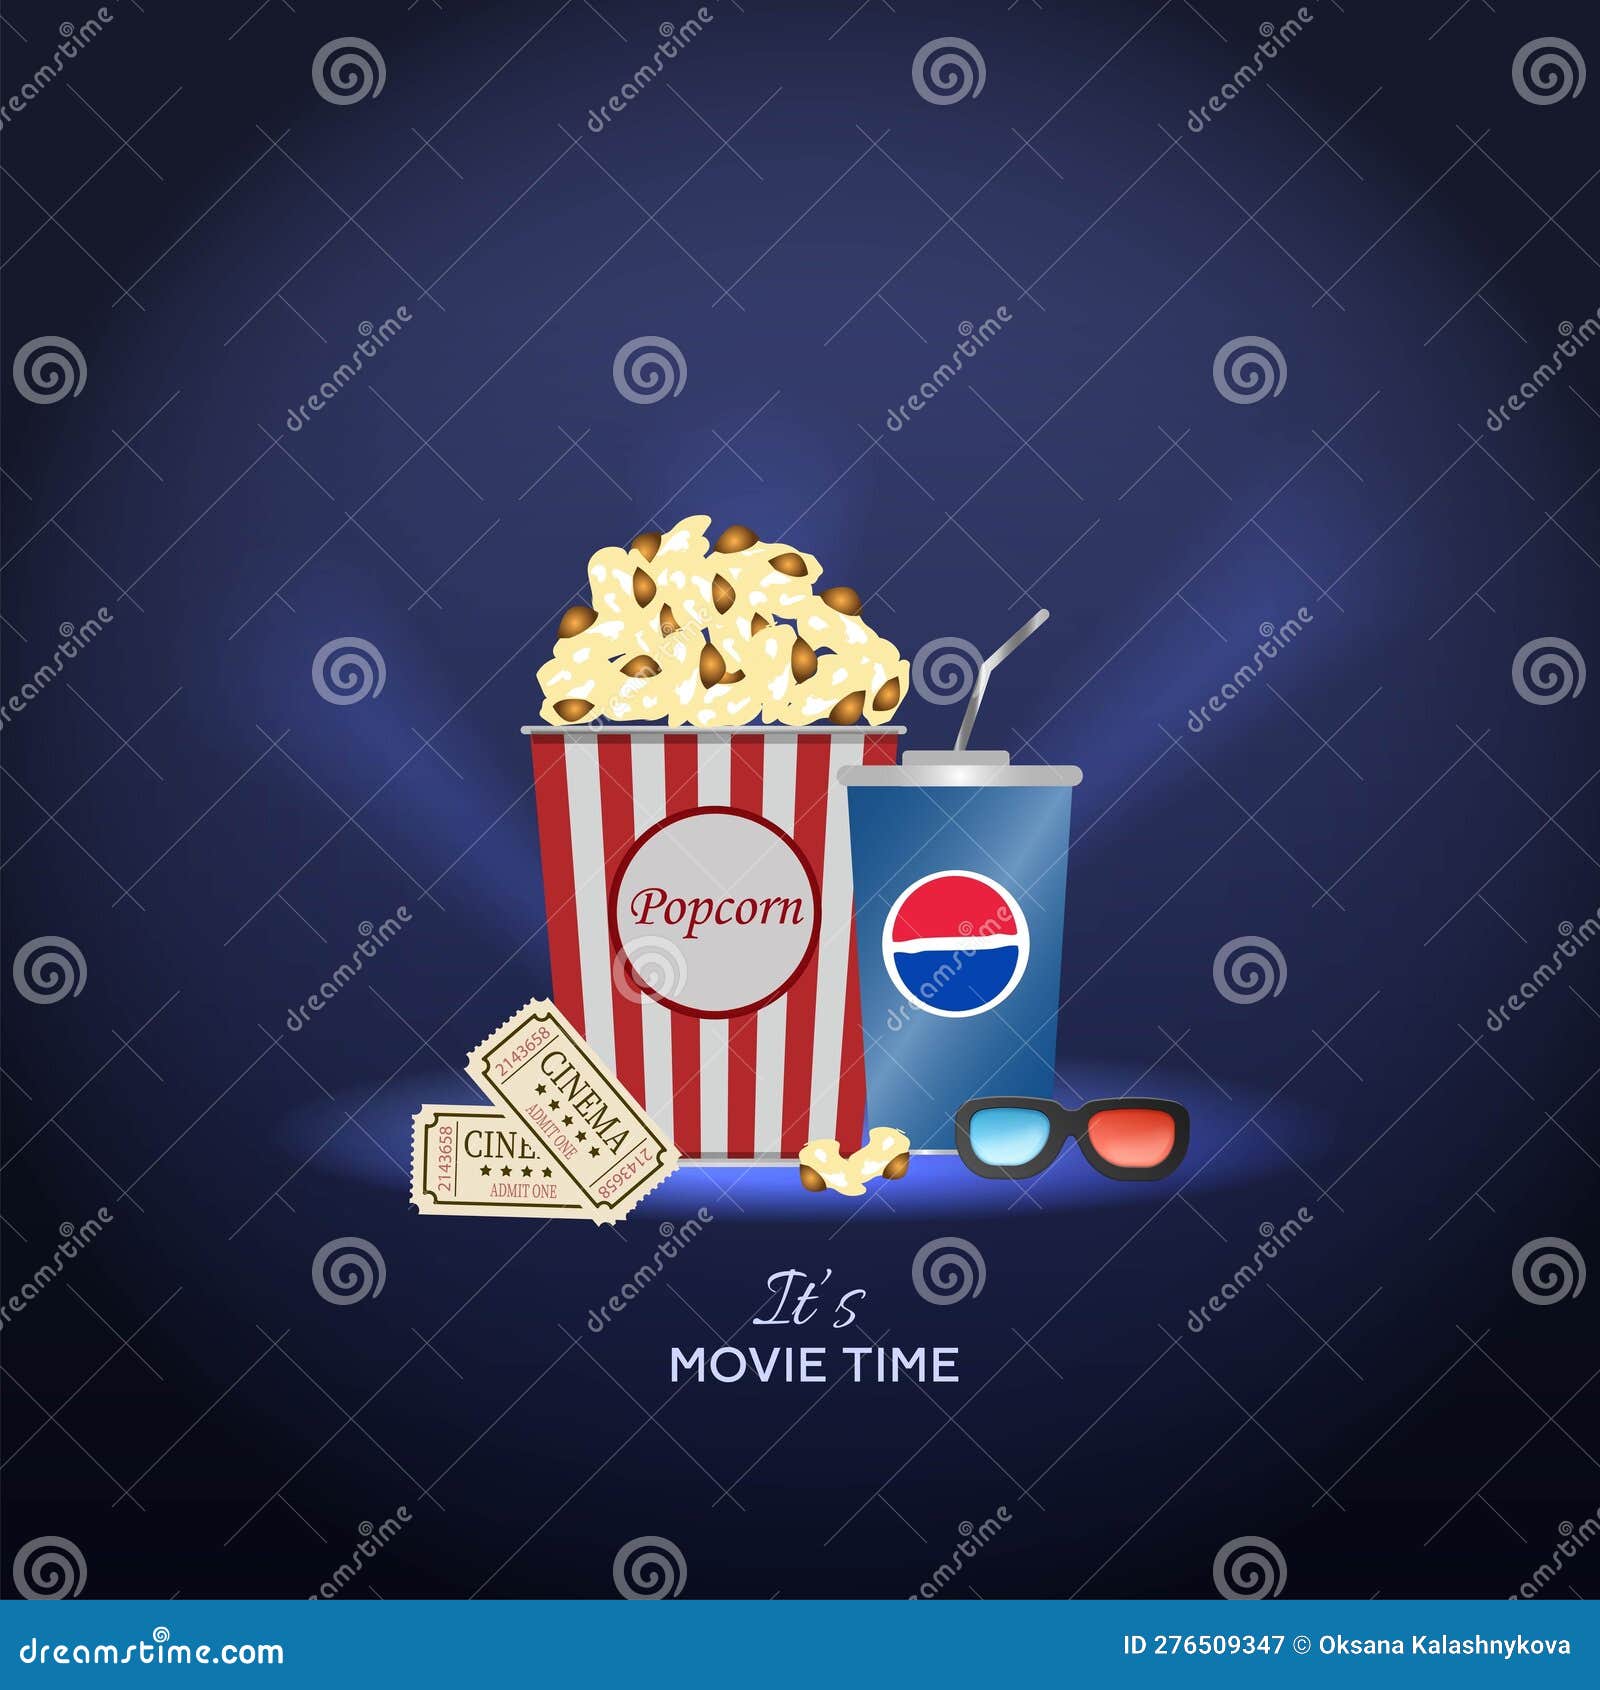 Blue Paper Cup With Pepsi Splash And Falling Popcorn In Box Isolat ...